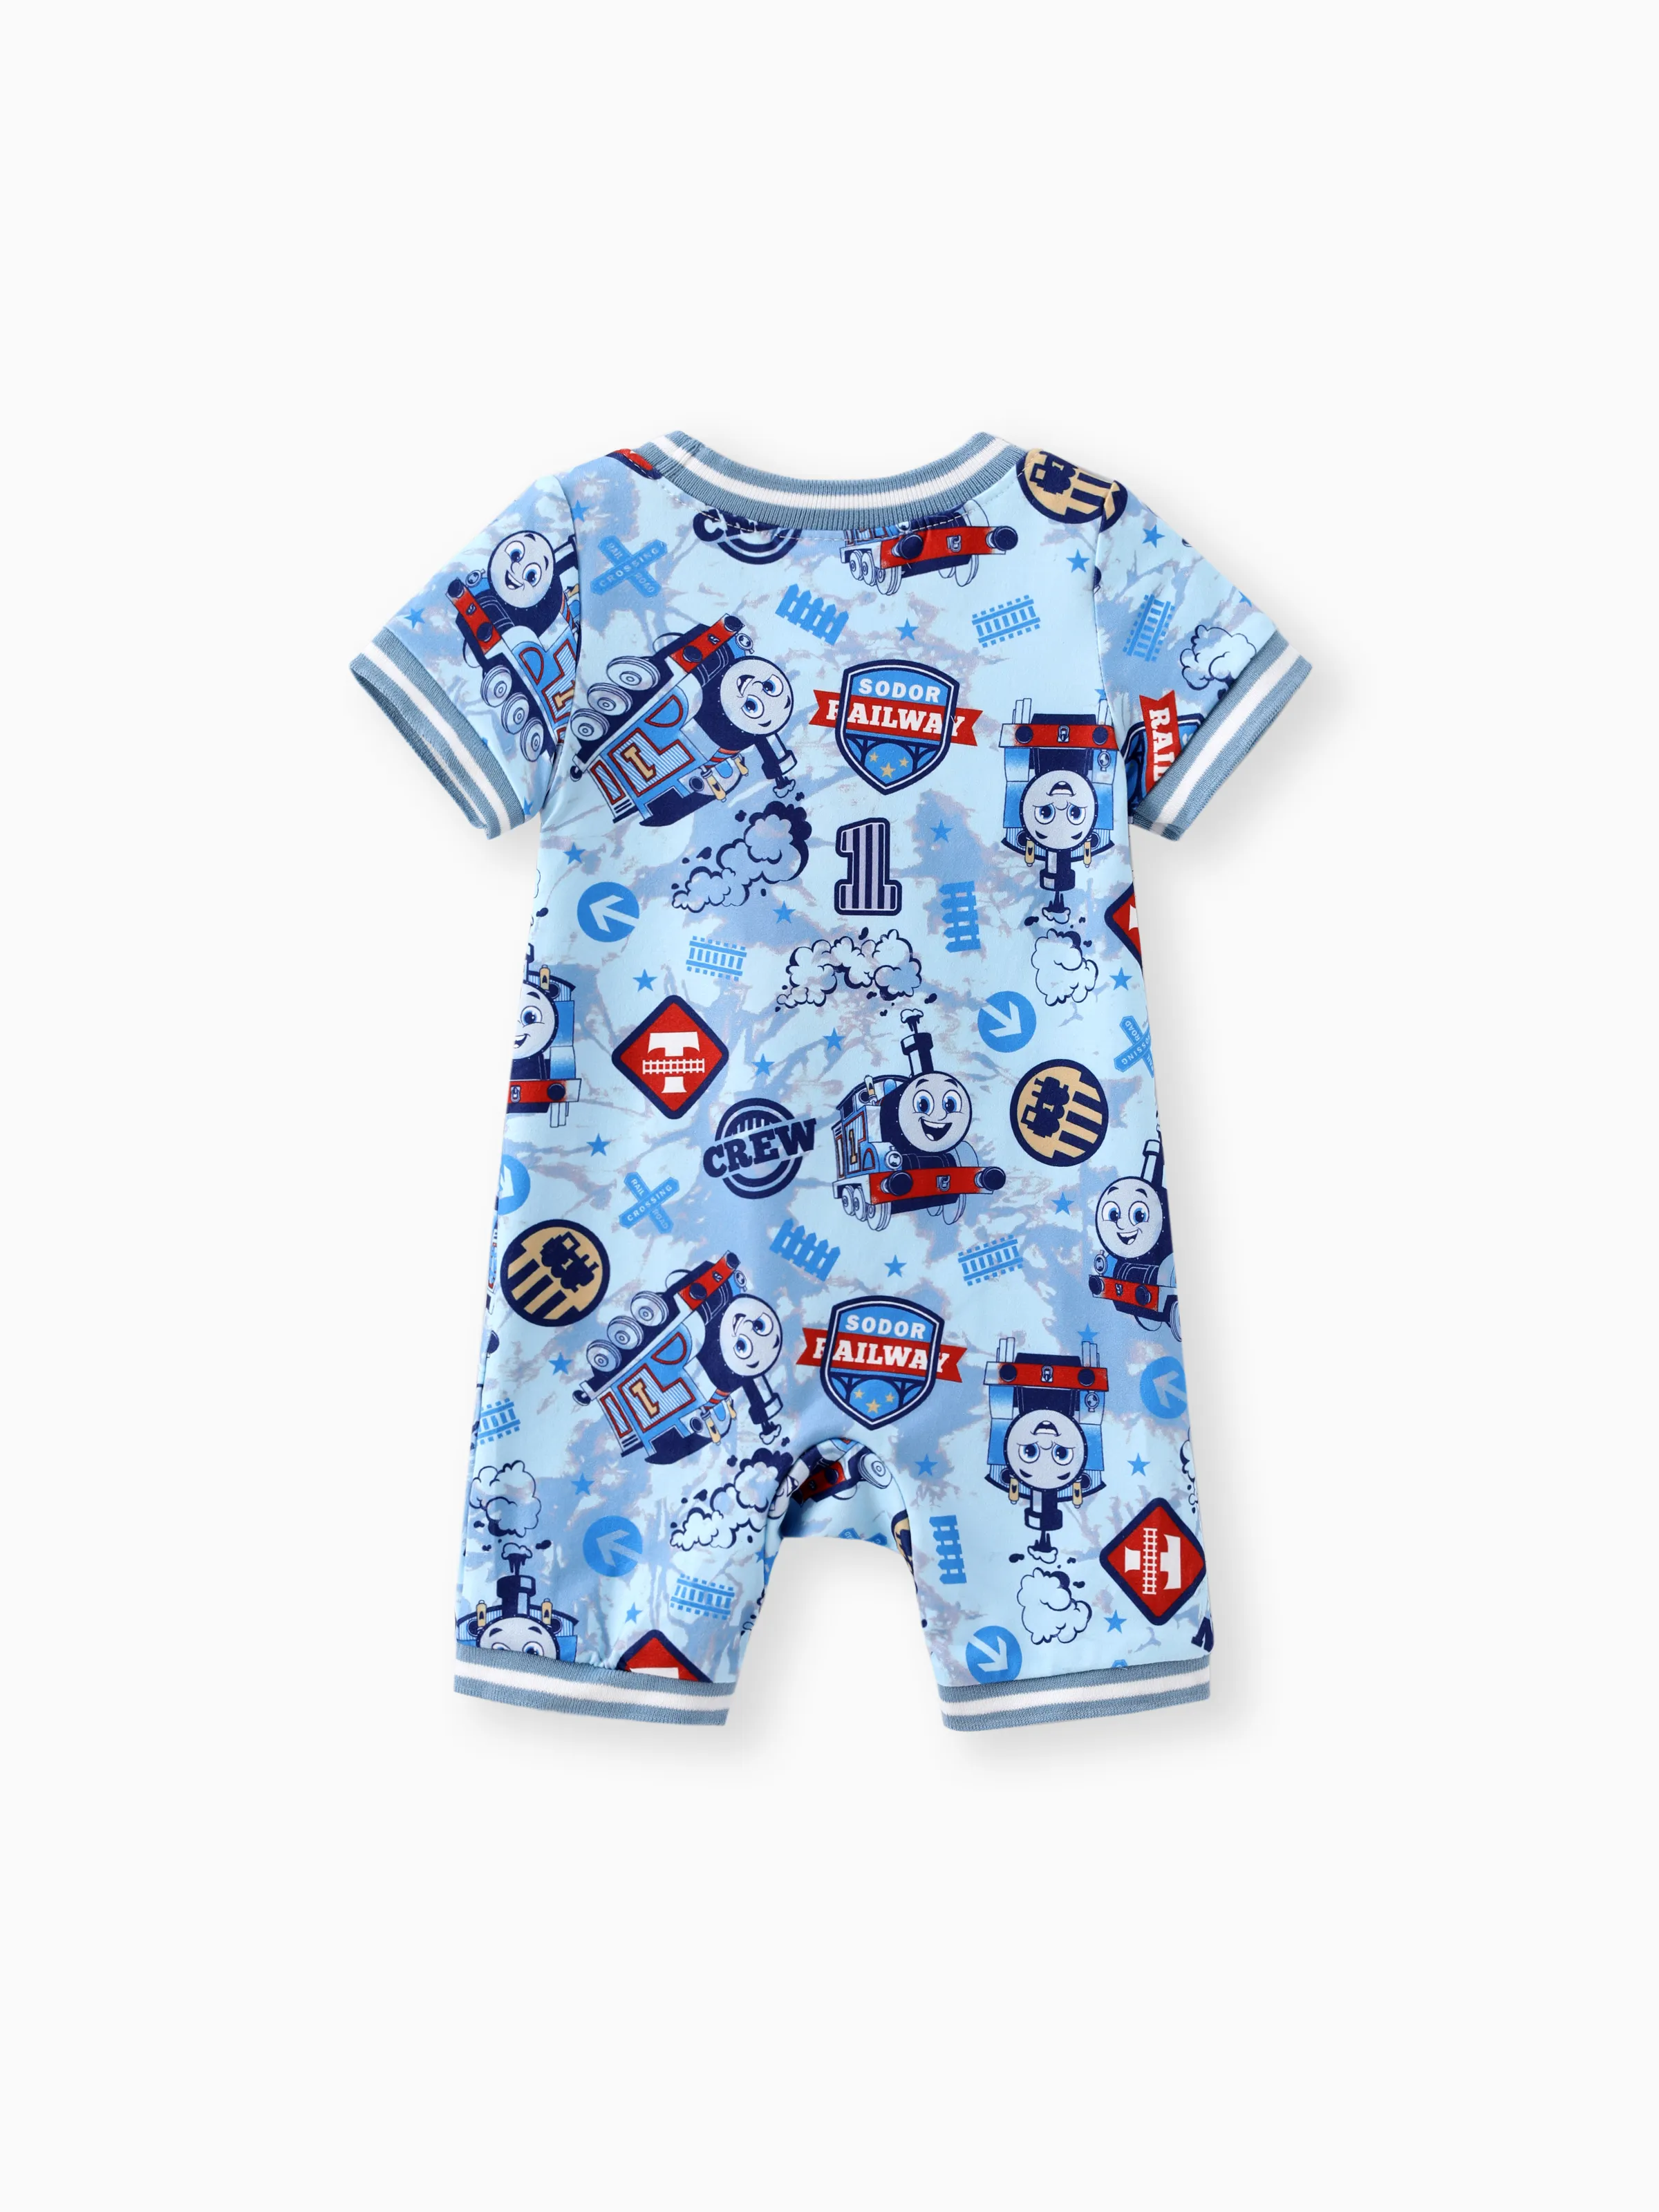 

Thomas and Friends Baby Boys 1pc Character Checkboard/Tie-dyed Print Short-sleeve Onesie